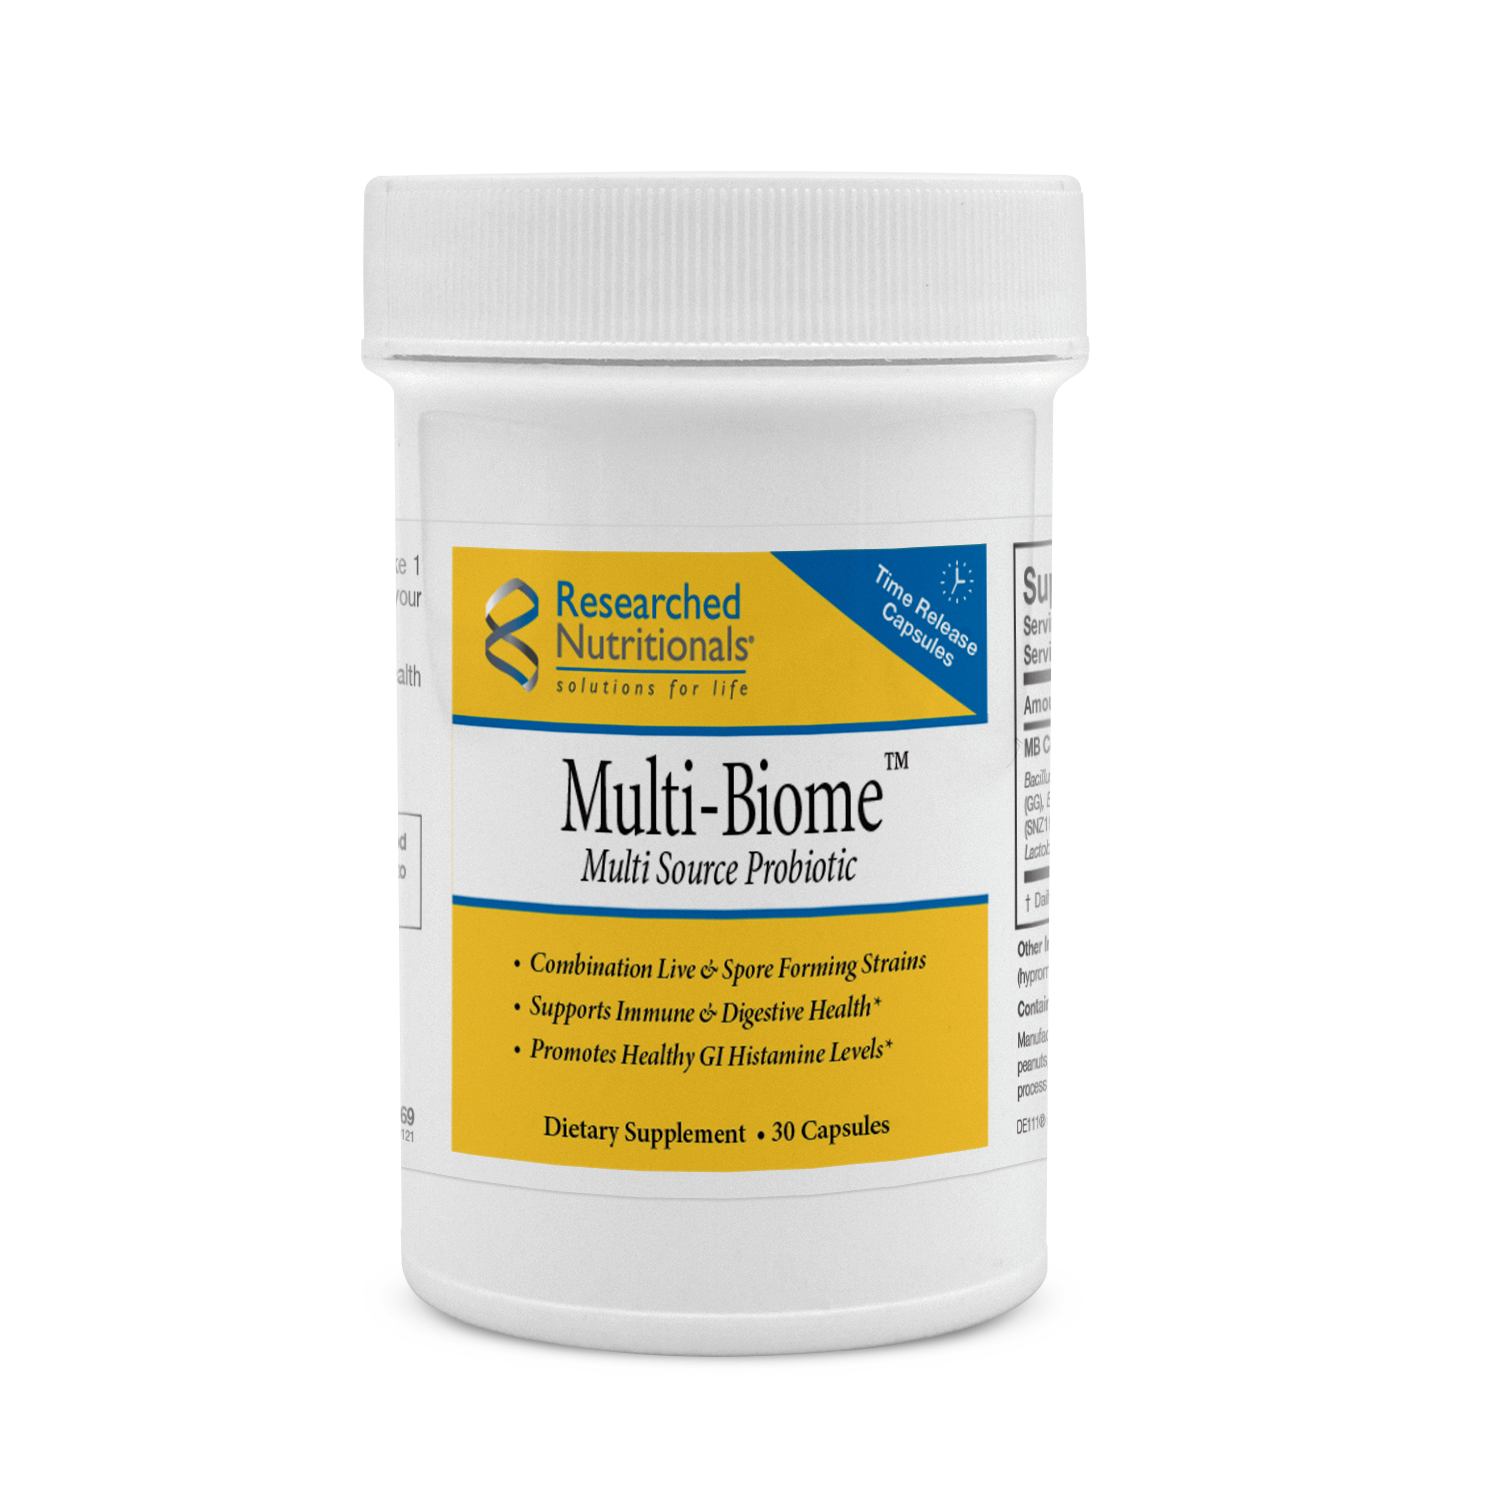 Researched Nutritionals Multi-Biome Multi Source Probiotic Capsules 30